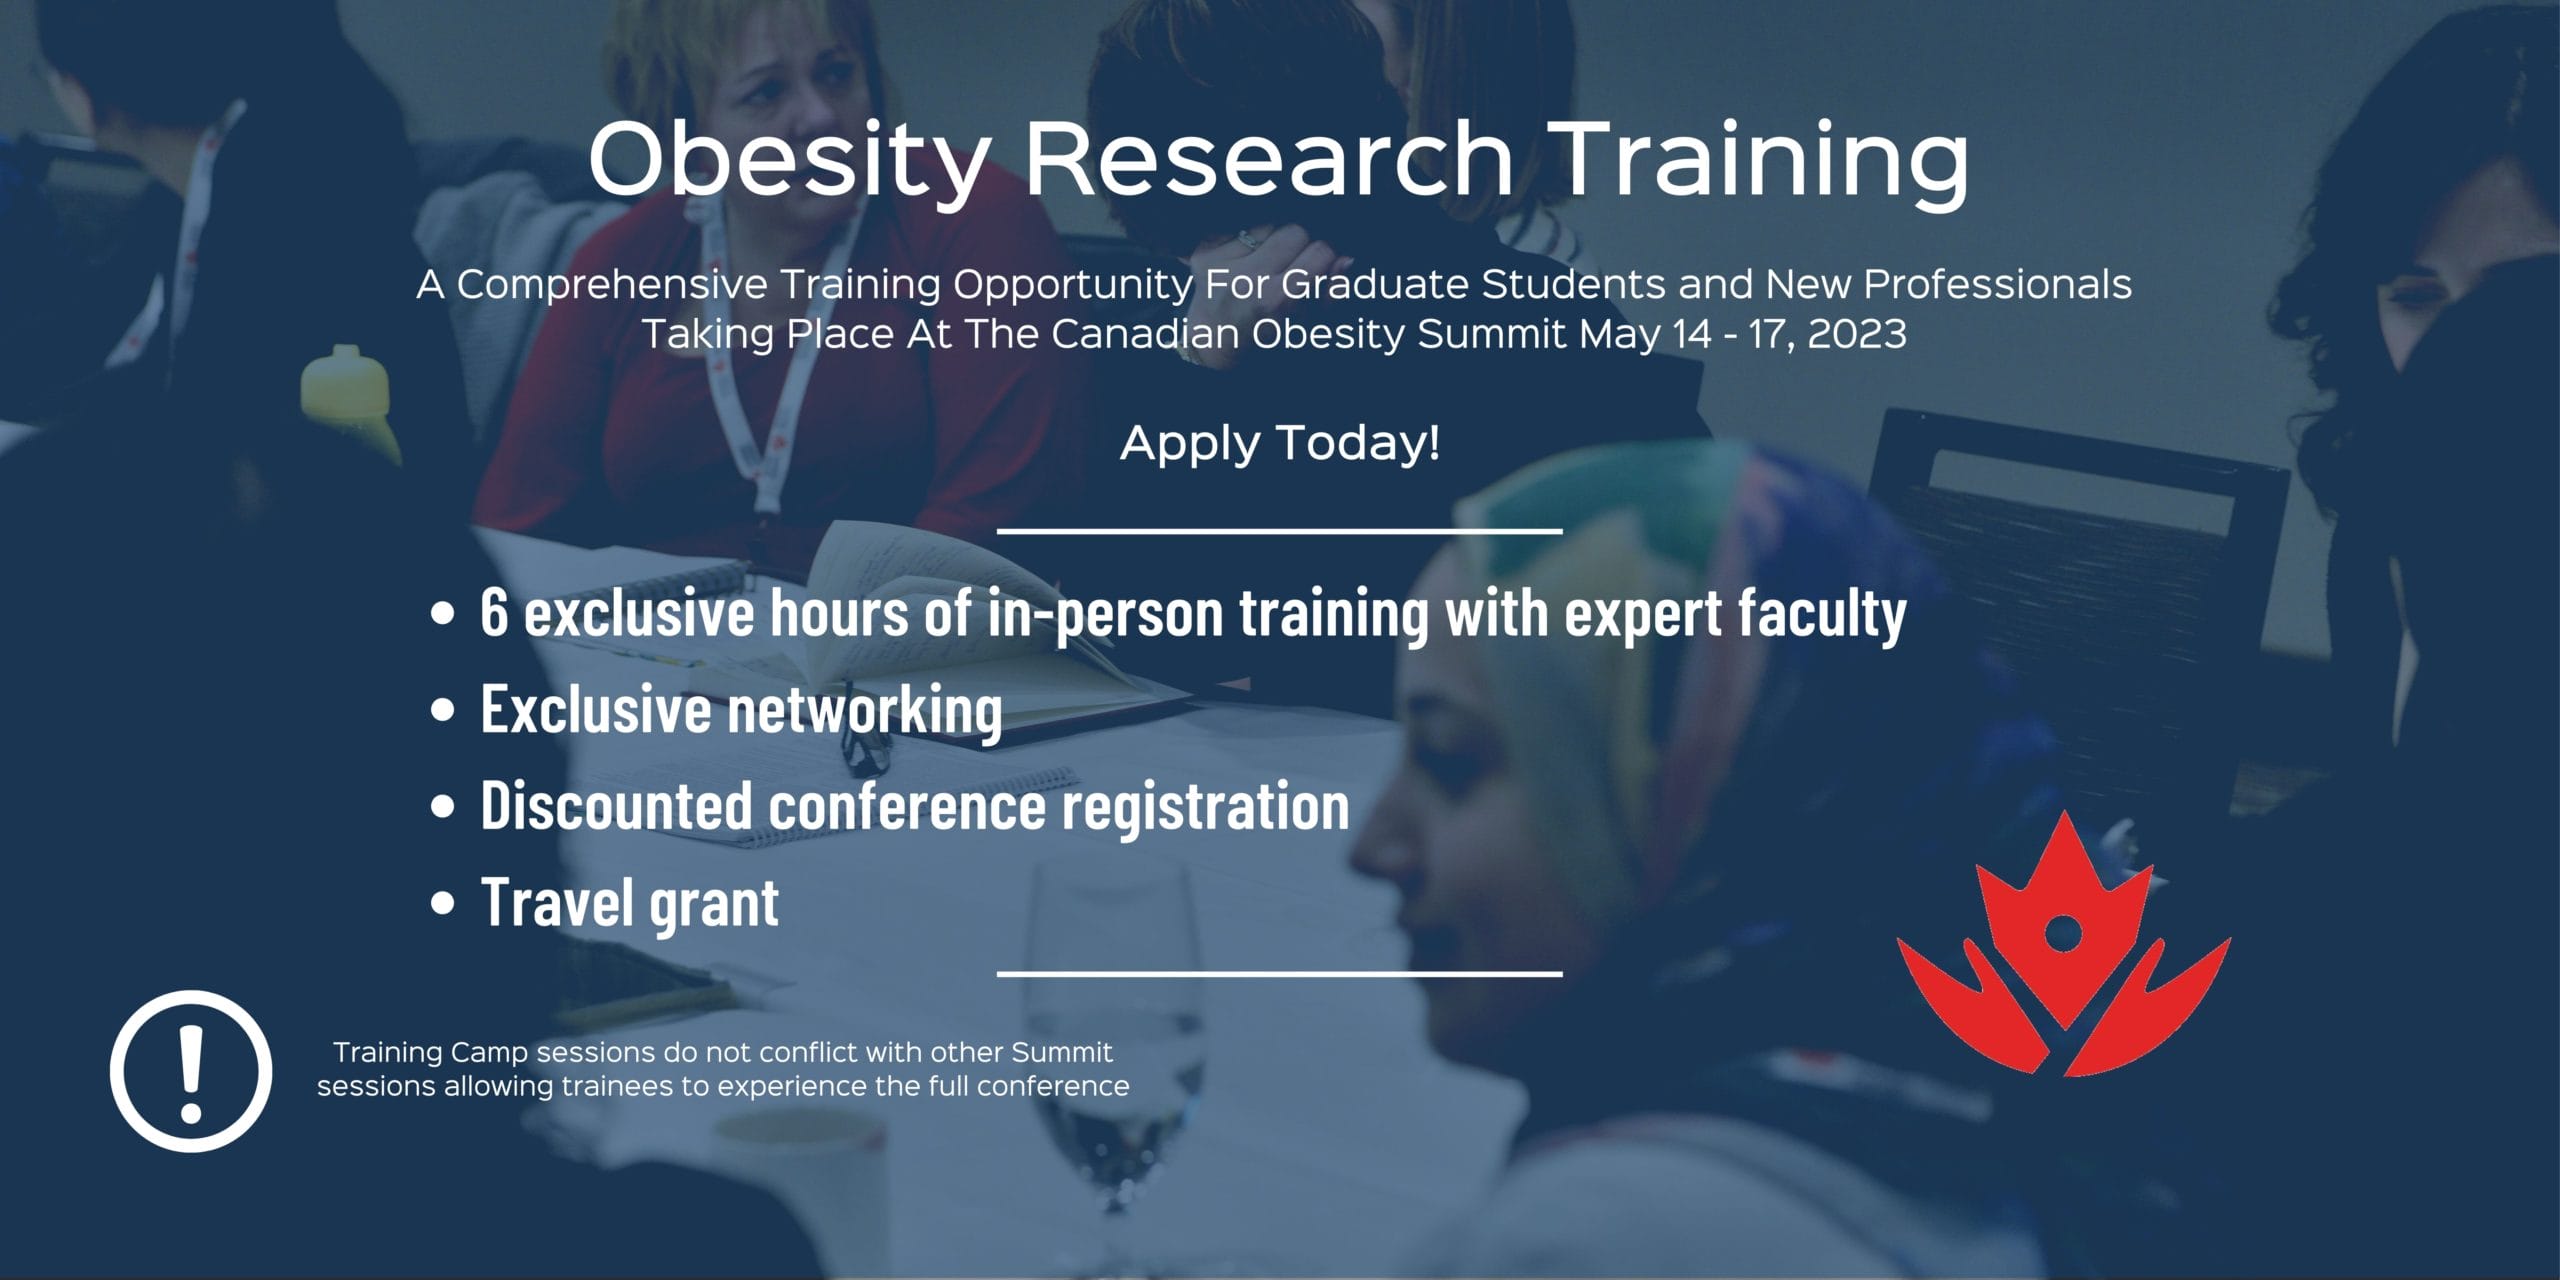 Promotional poster for obesity research training seminar showing a group of professionals in a meeting, with text highlights about training features and dates.